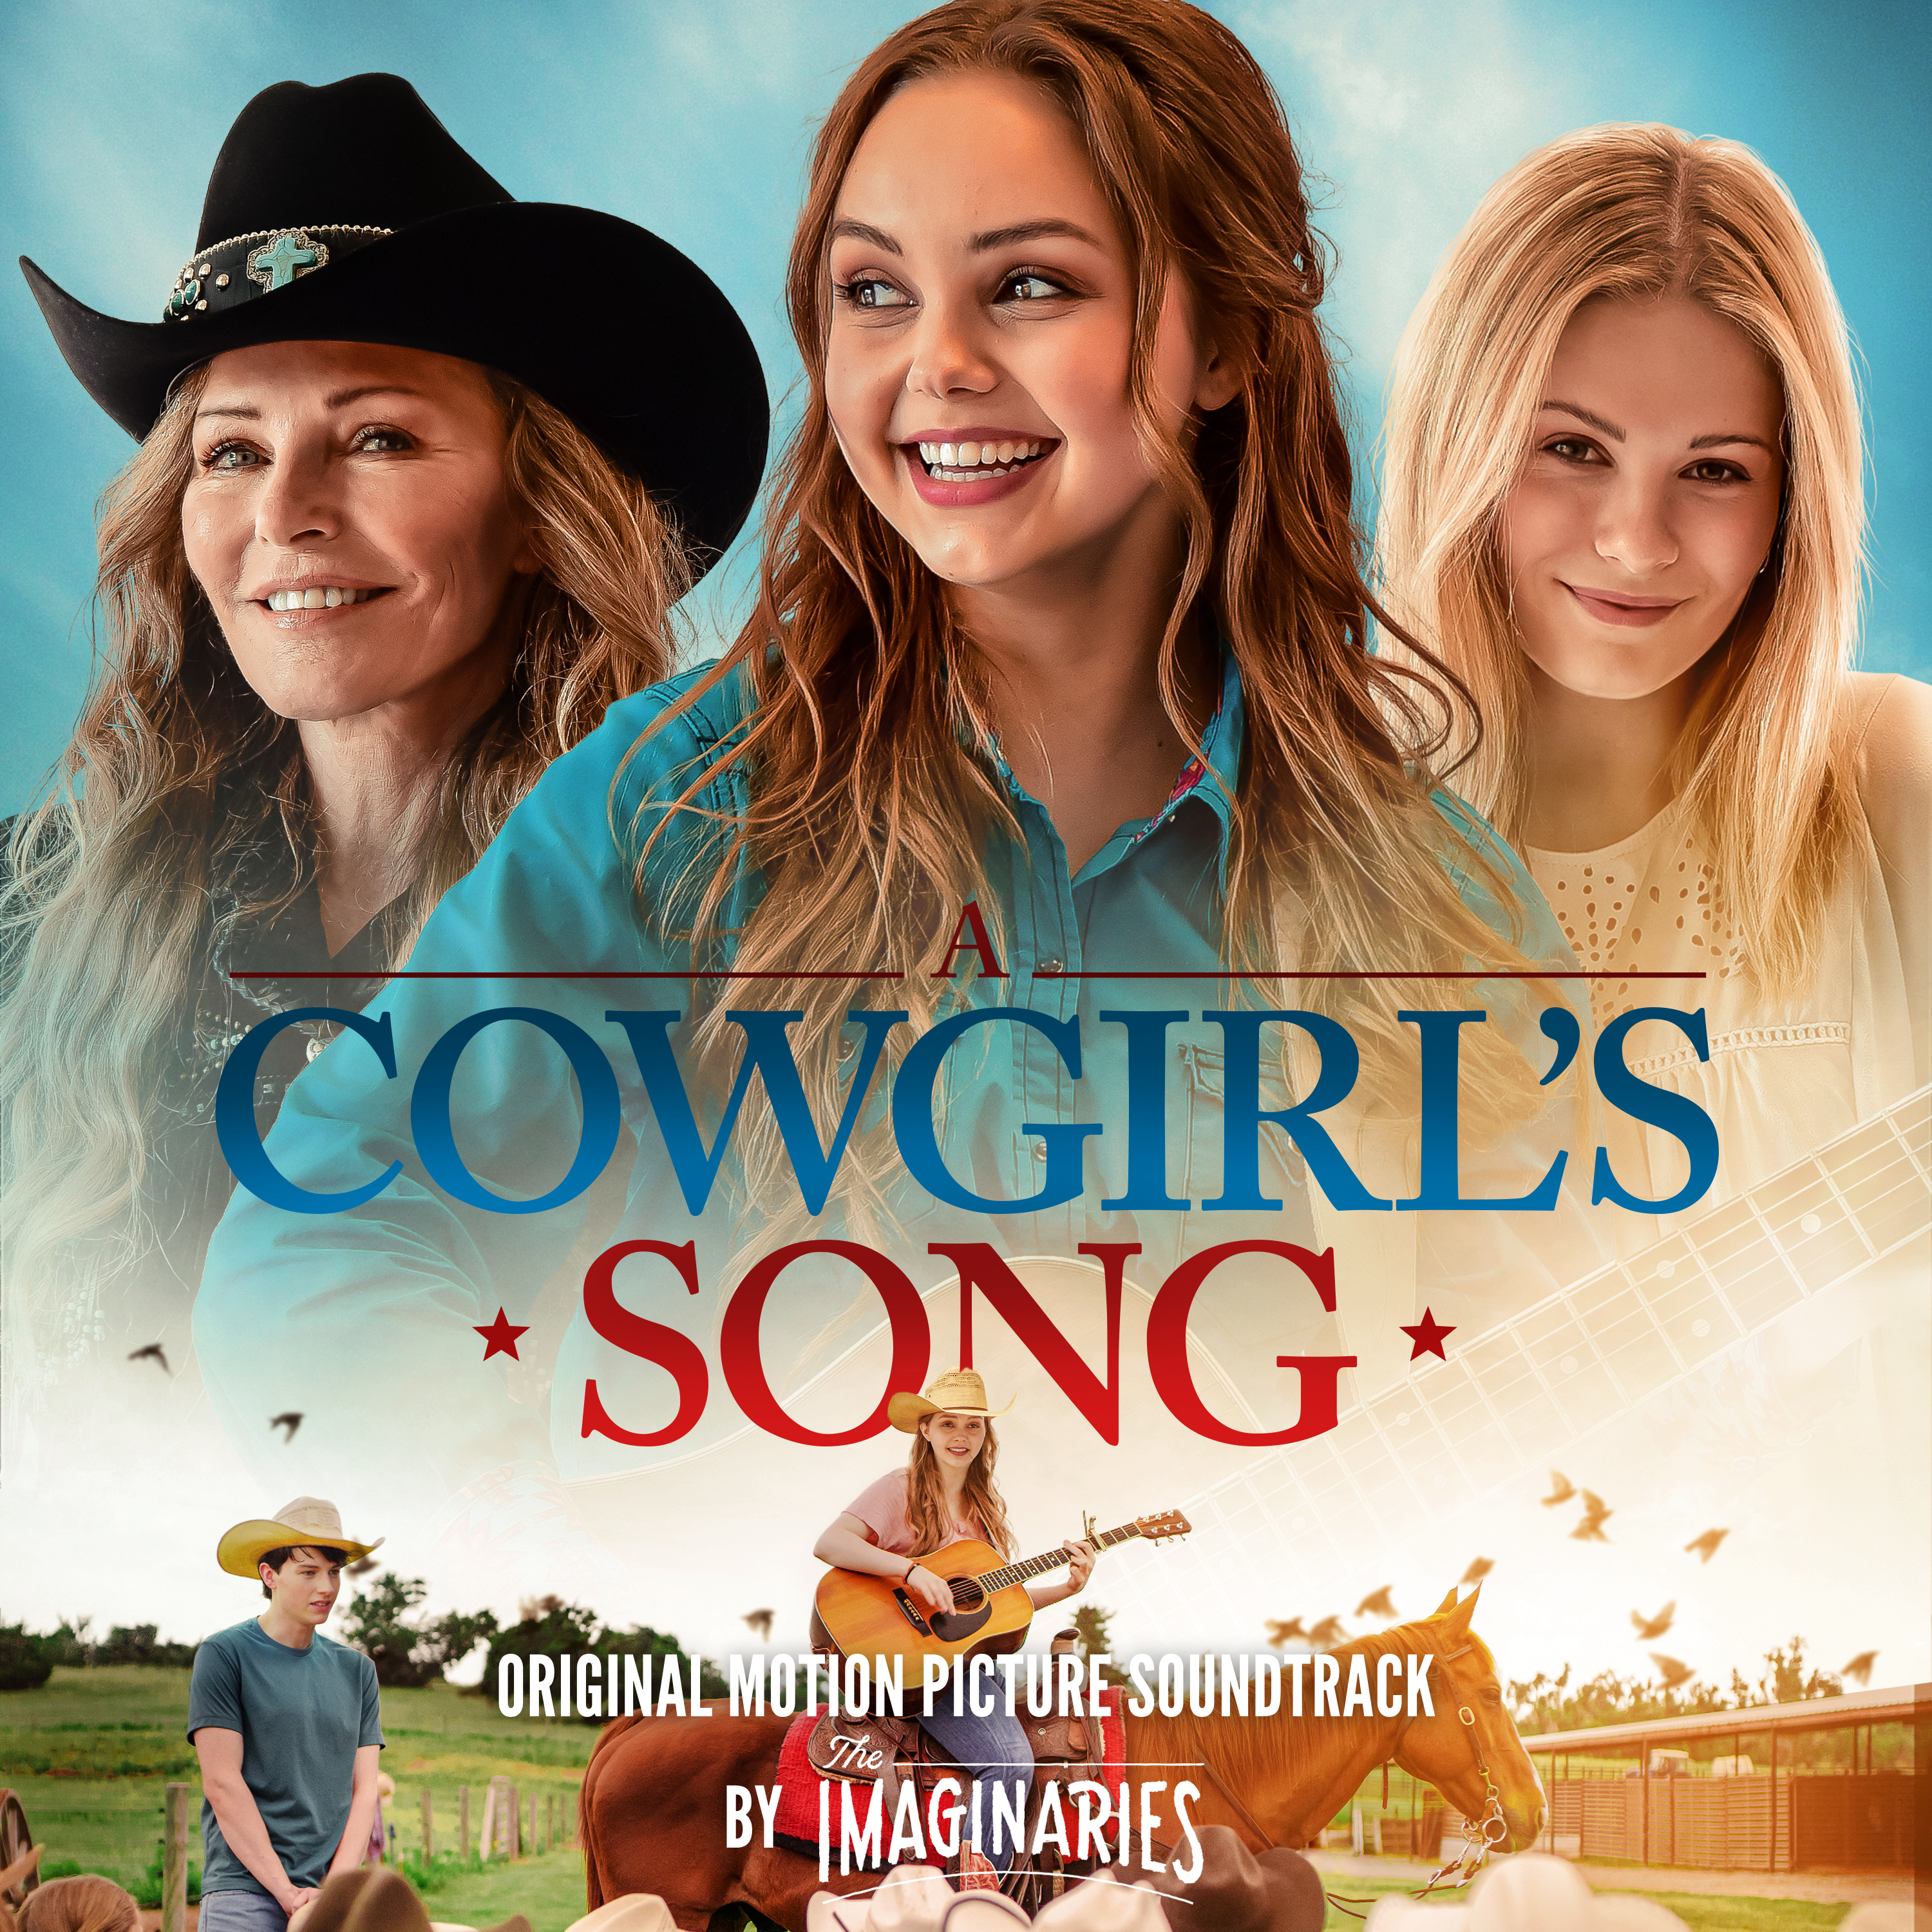 A Cowgirl's Song Soundtrack